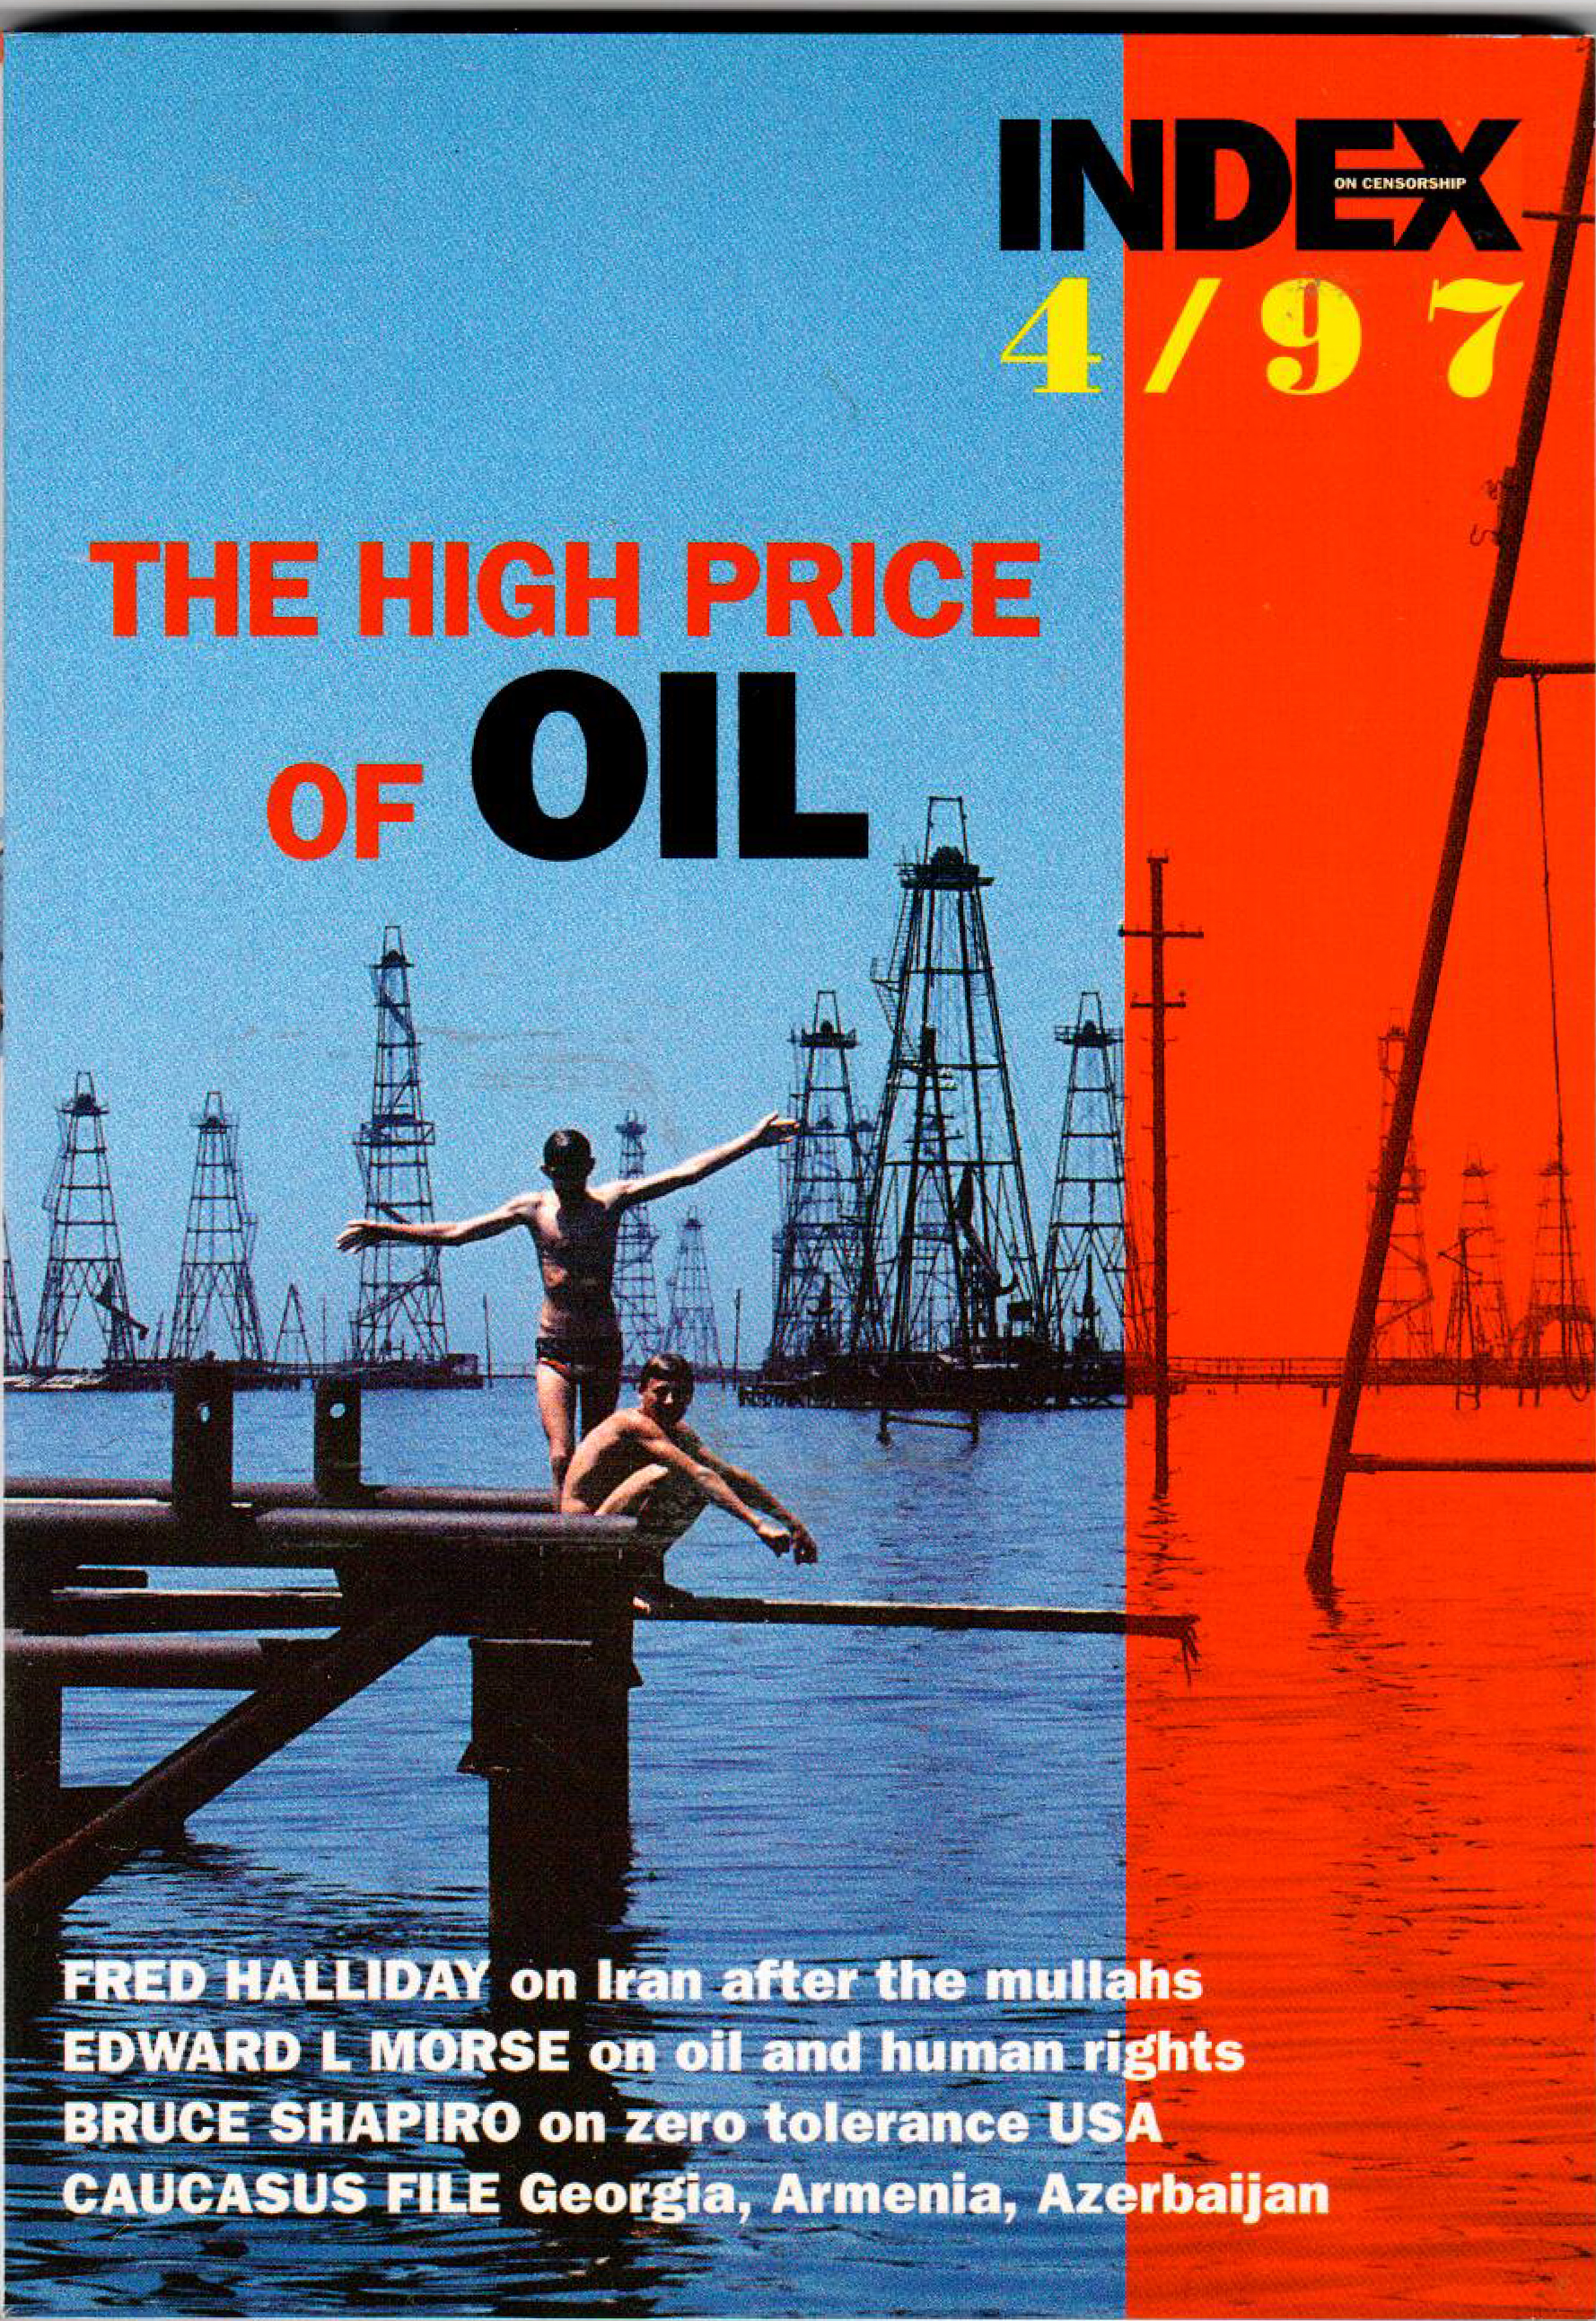 The high price of oil